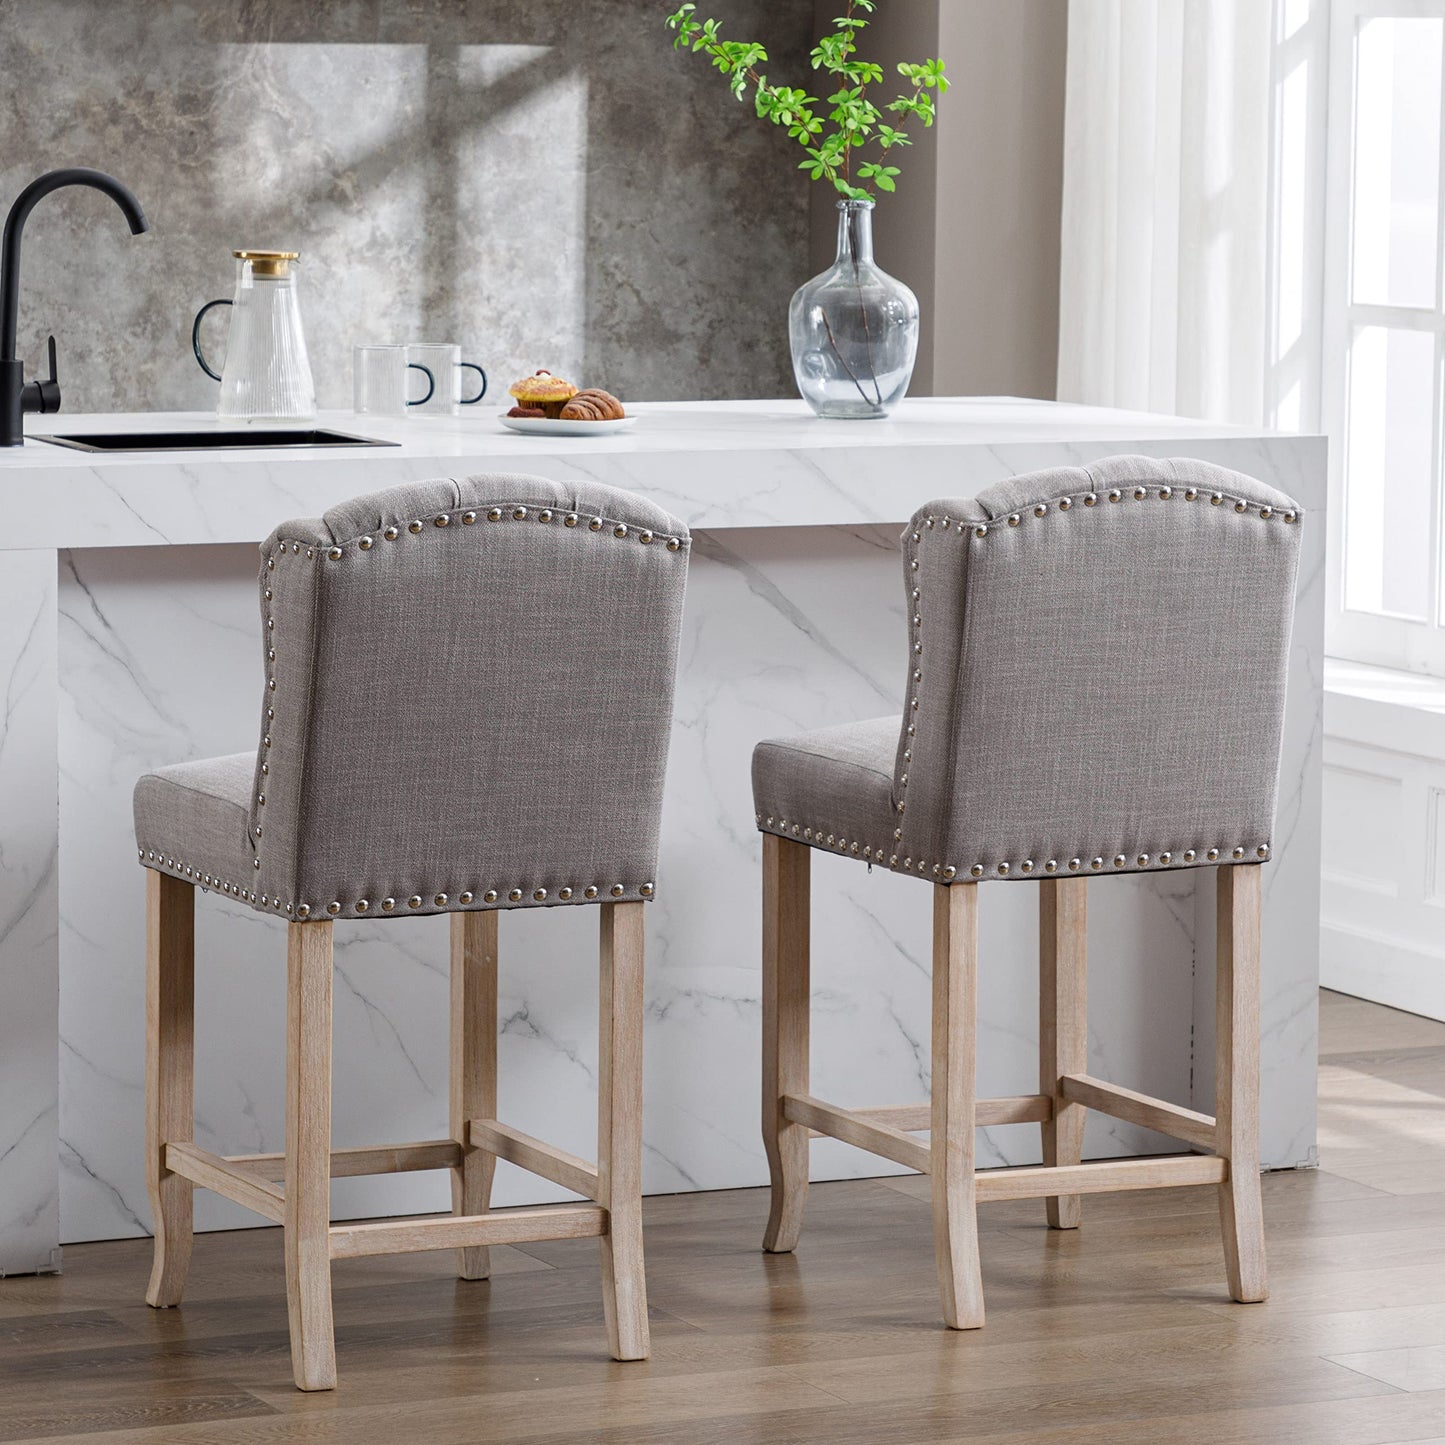 DUOMAY Tufted 26 Inch Counter Height Bar Stools Set of 2, Linen Fabric Counter Chairs with Back, Armless Barstools Breakfast Stools W/Solid Wood Legs for Kitchen Island Lounge Pub Bar, Grey